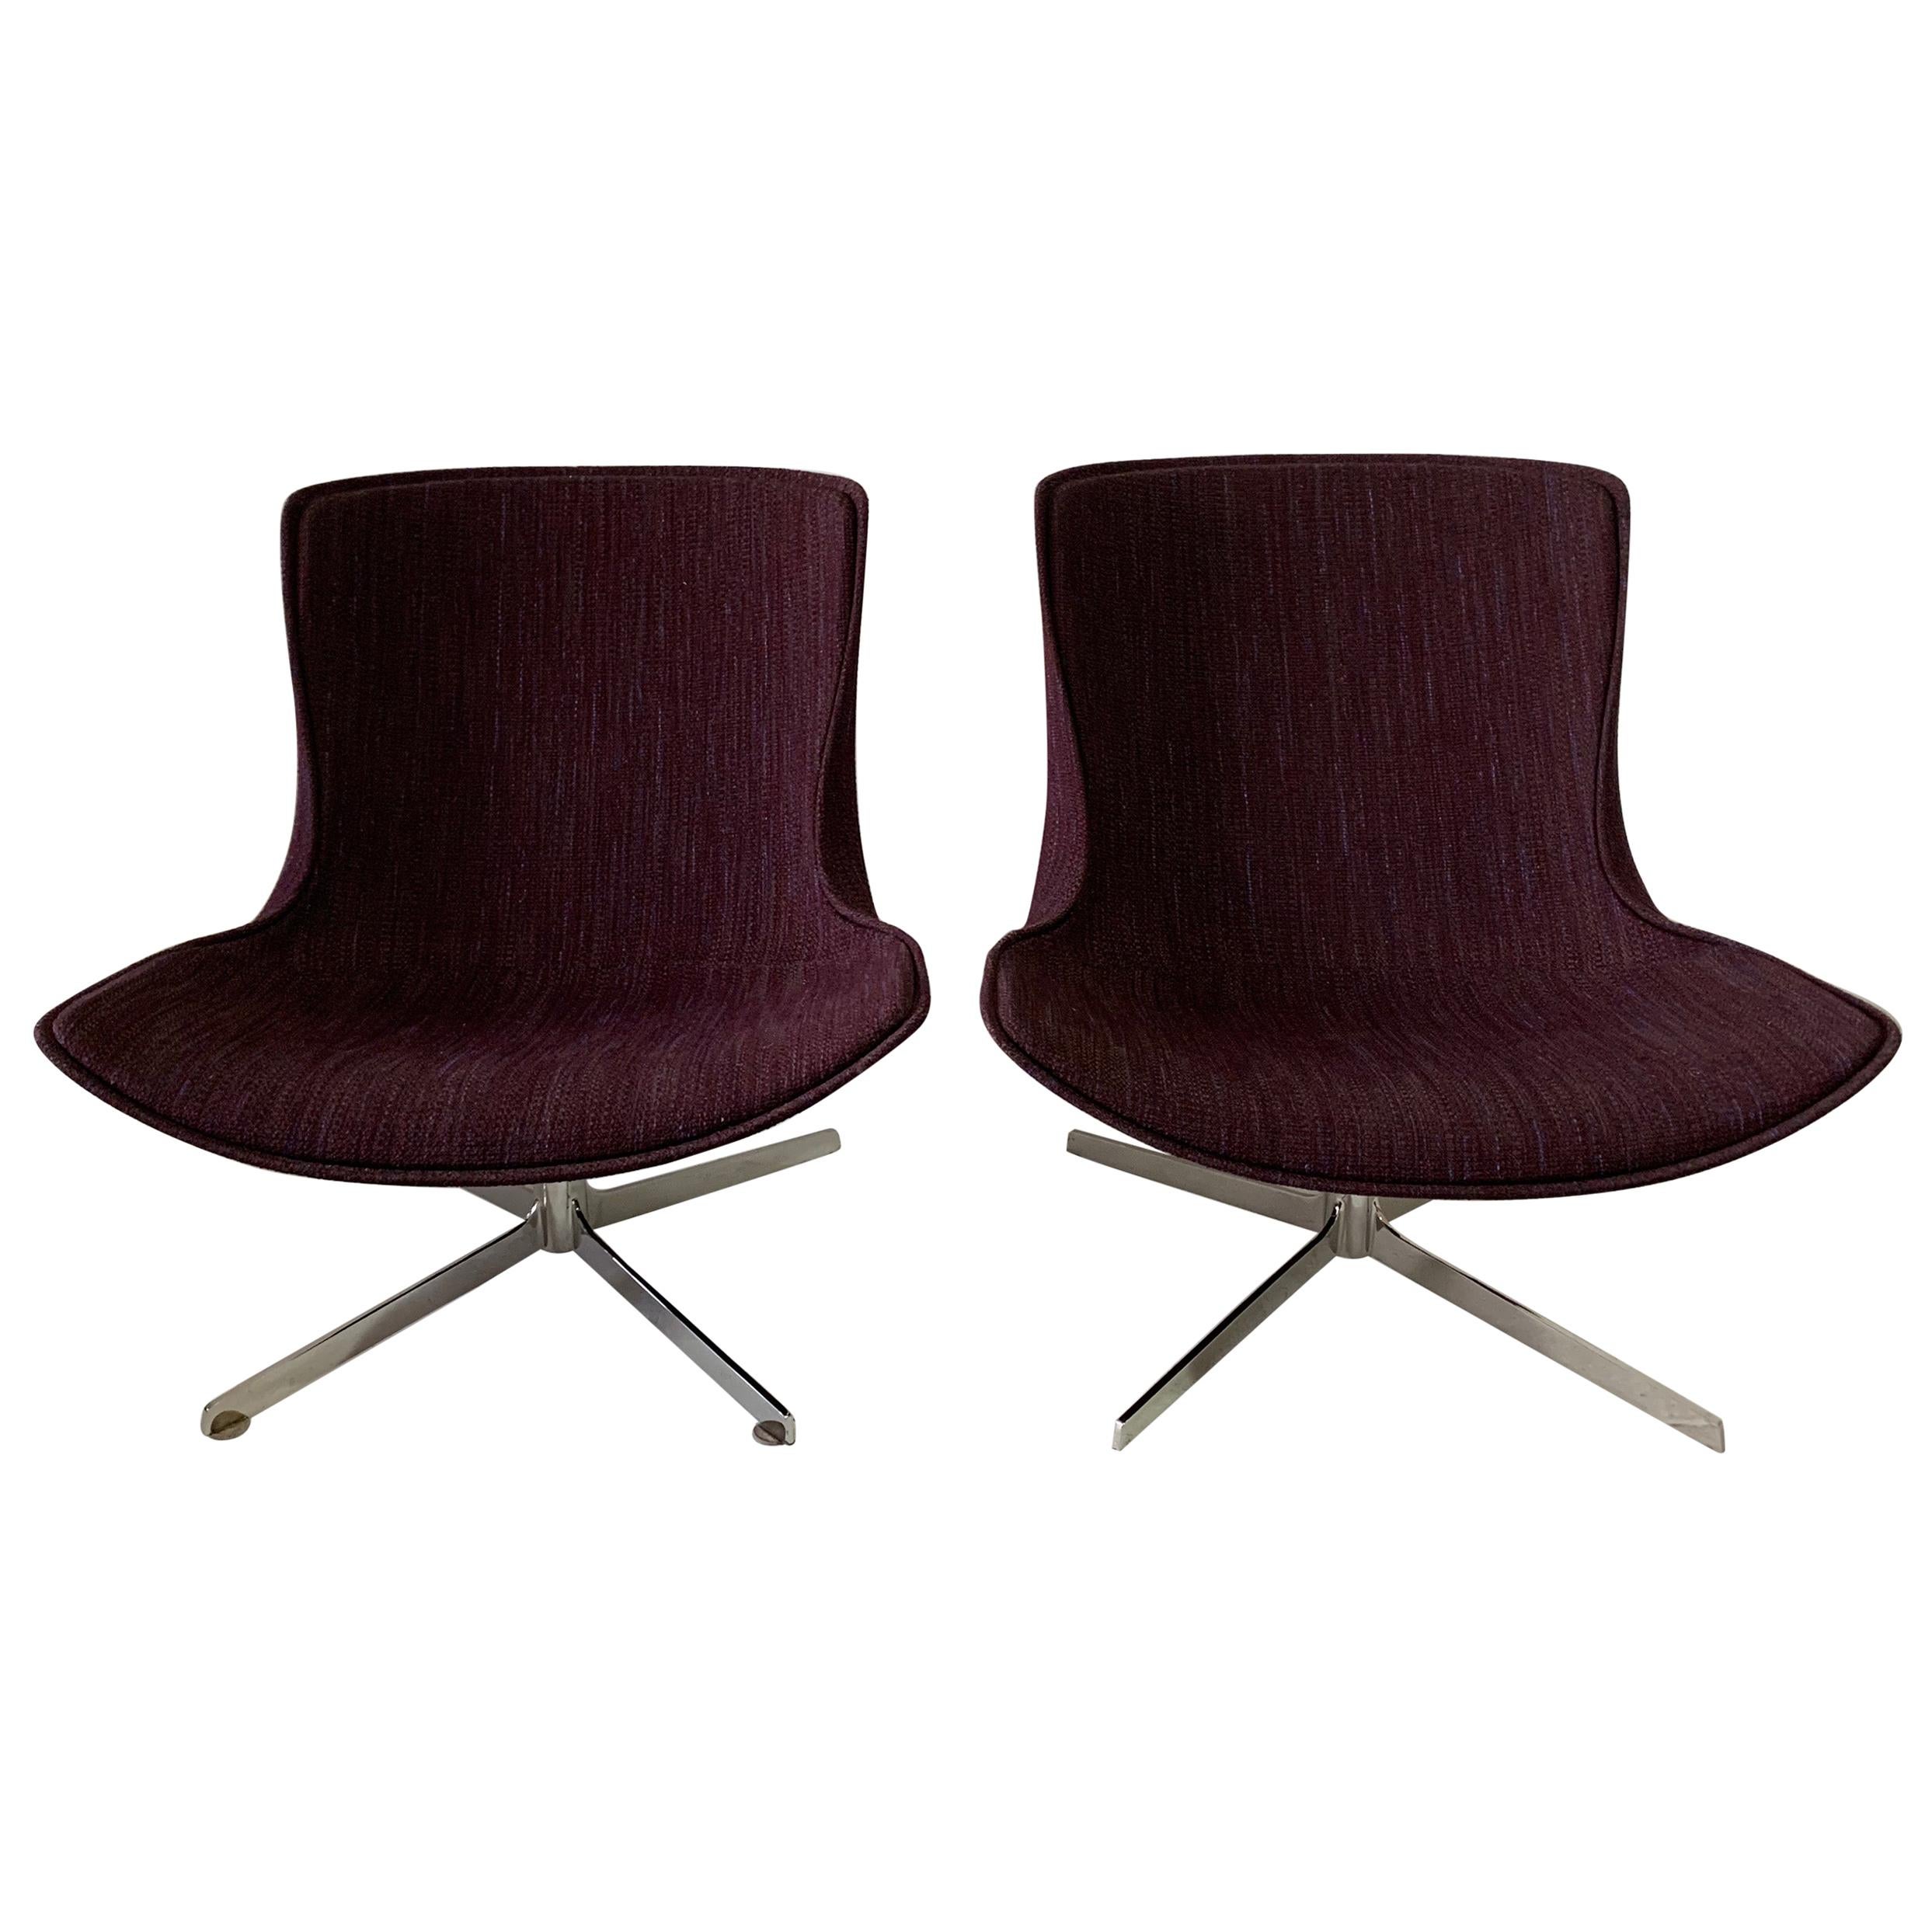 Nicos Zographos Style Midcentury Swivel Chairs, Pair For Sale